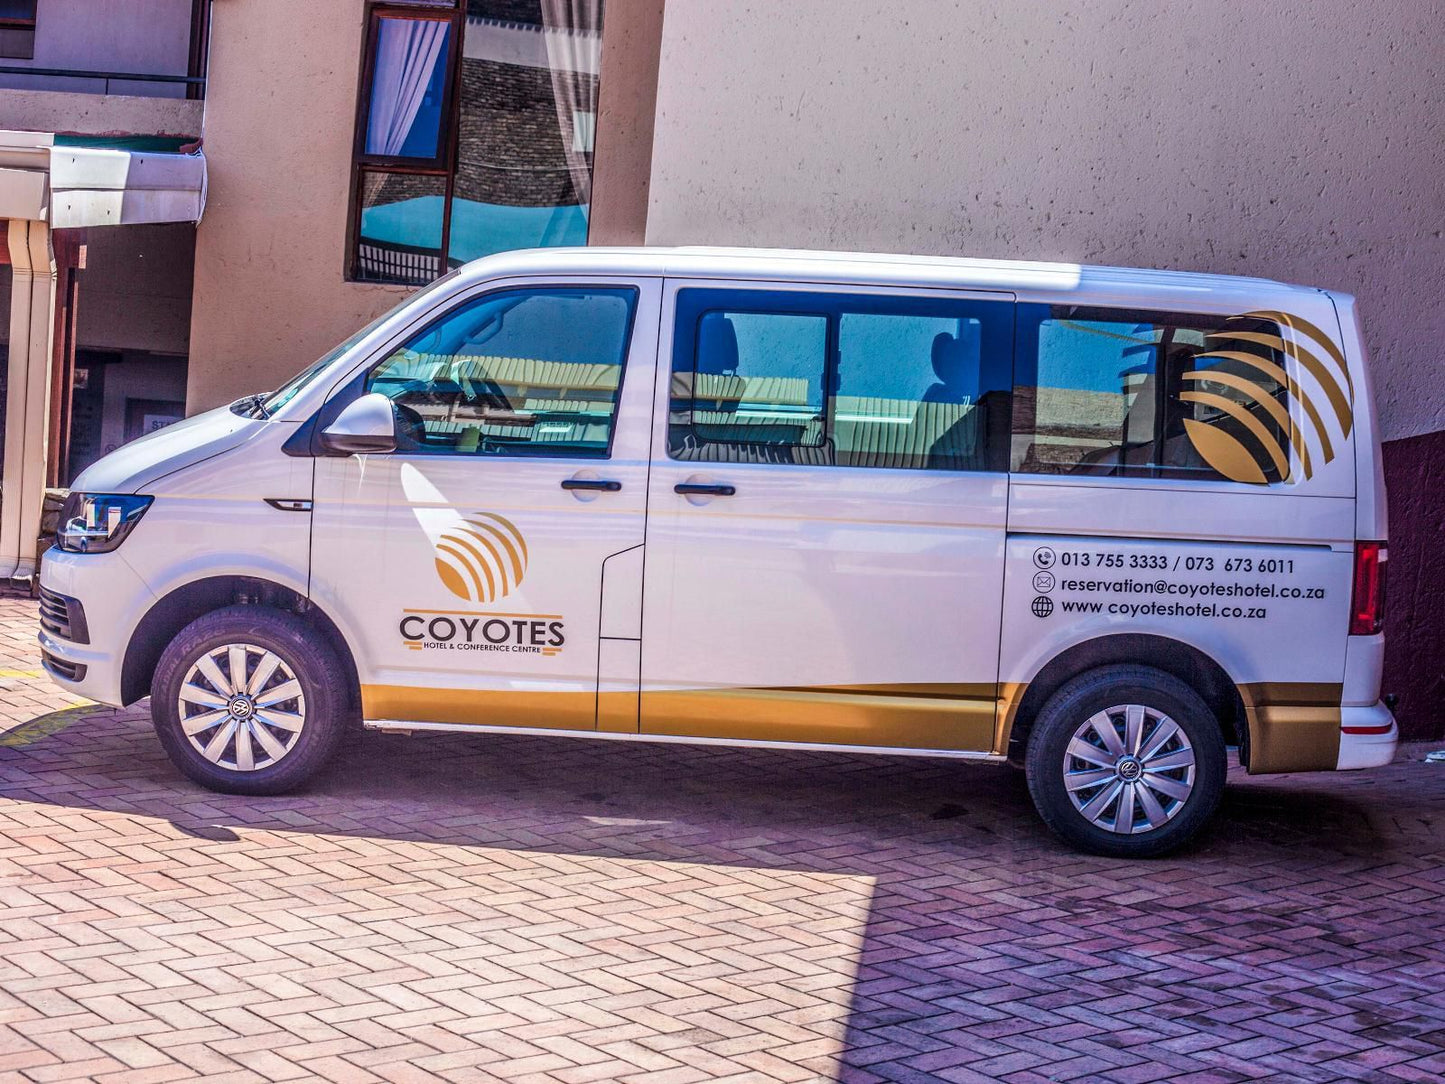 Coyotes Hotel And Conference Centre Nelspruit Mpumalanga South Africa Car, Vehicle